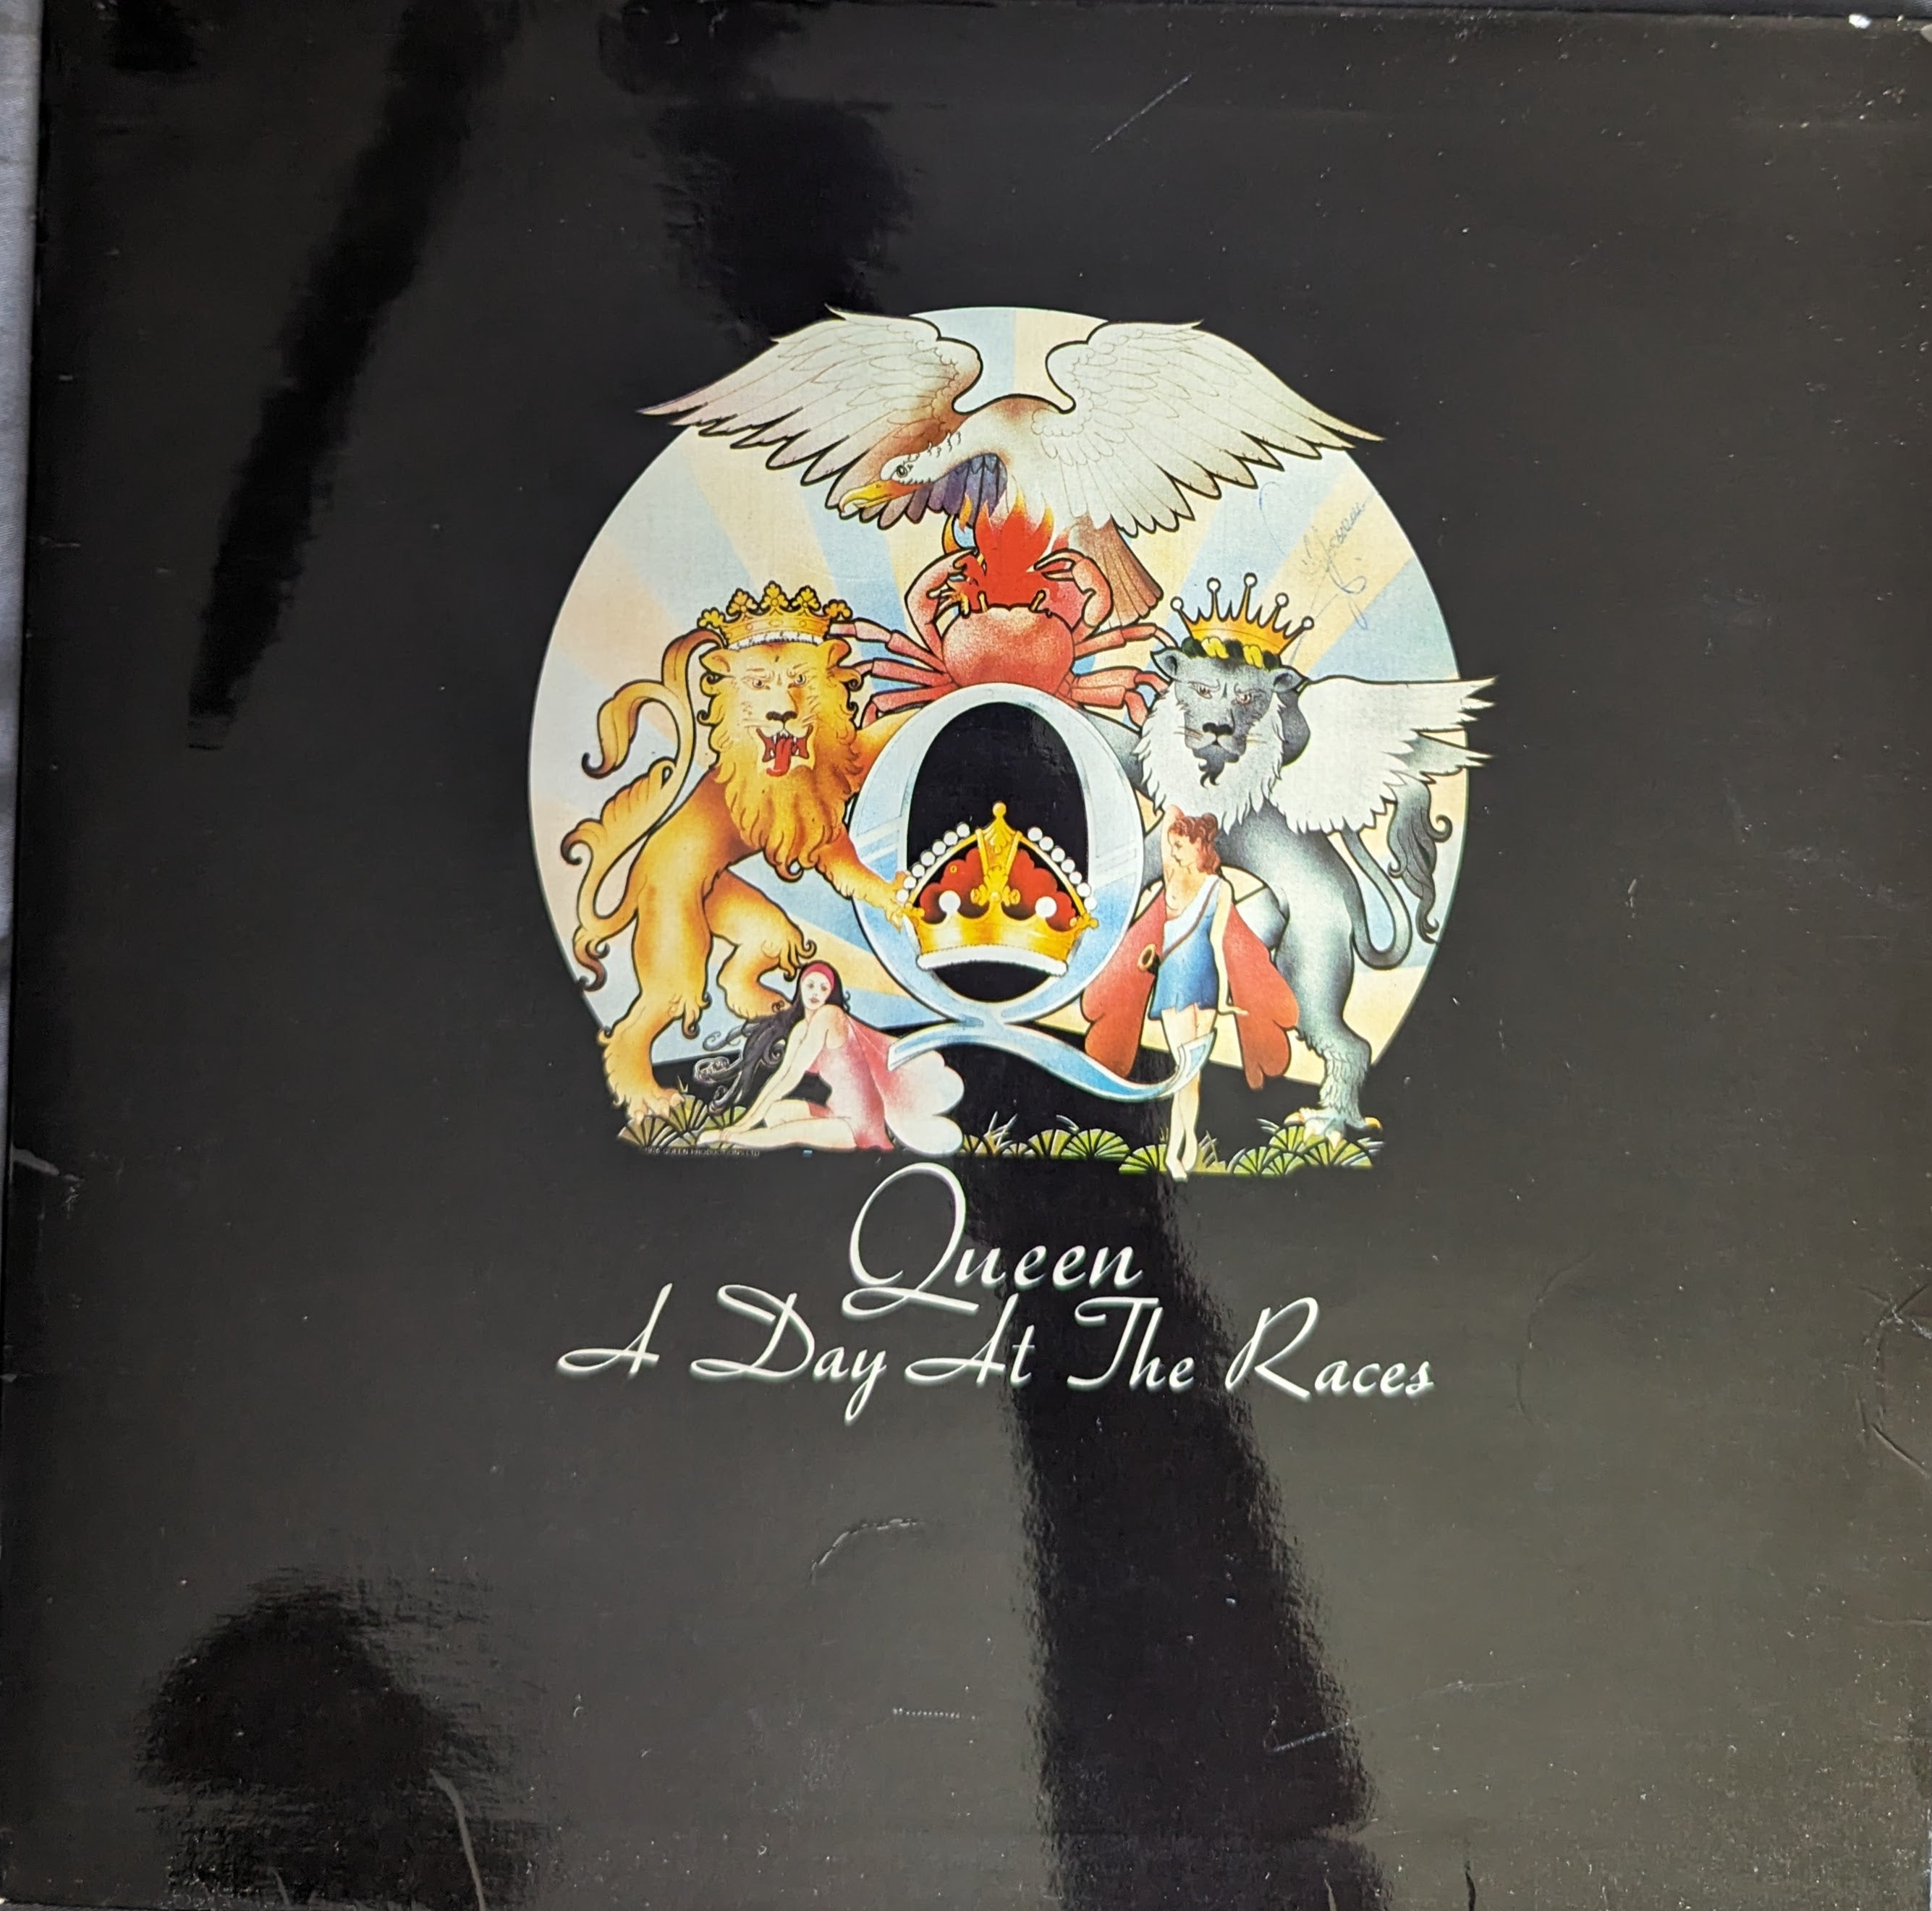 Vinilo Queen A Day At The Races - Abominatron